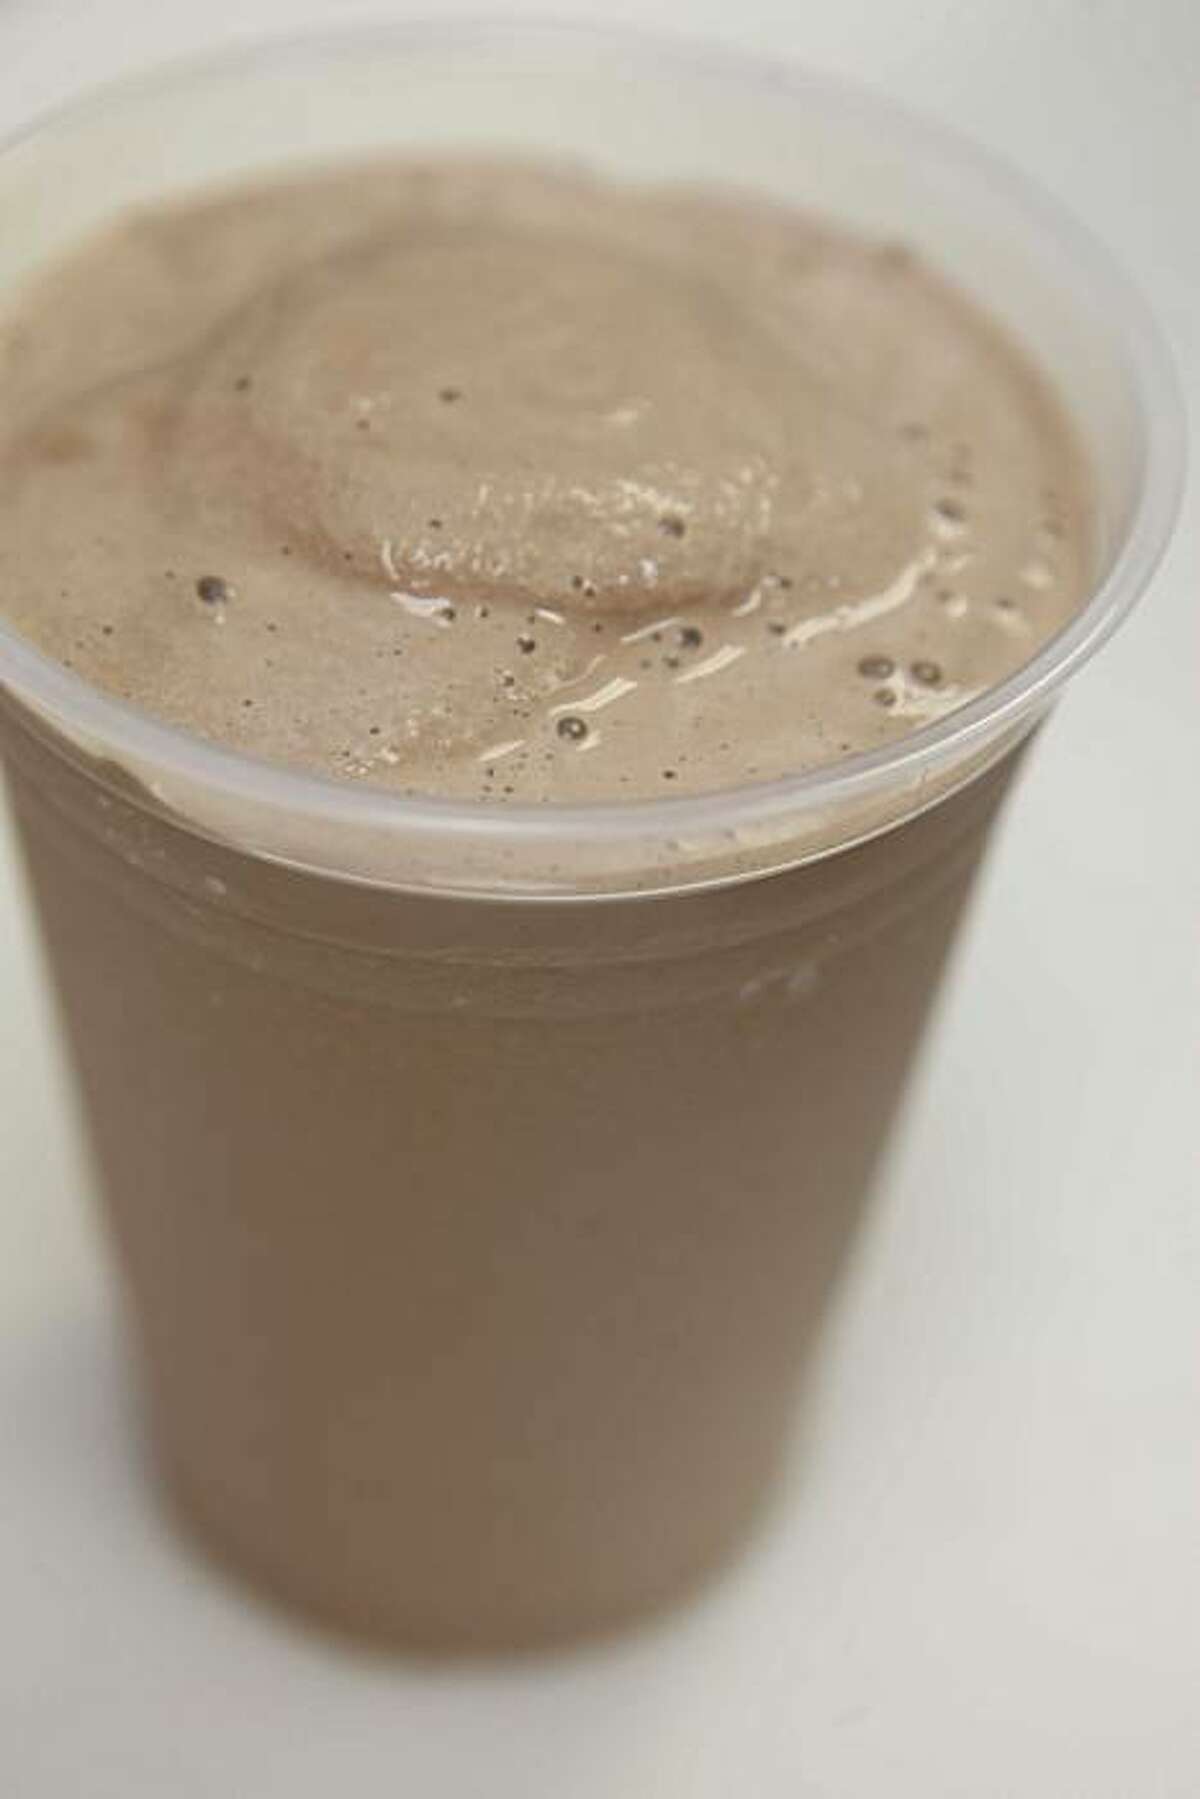 A Chocolate Milk Shake is ready for a customer at Truburger on Wednesday March 17, 2010 in Oakland, Calif.